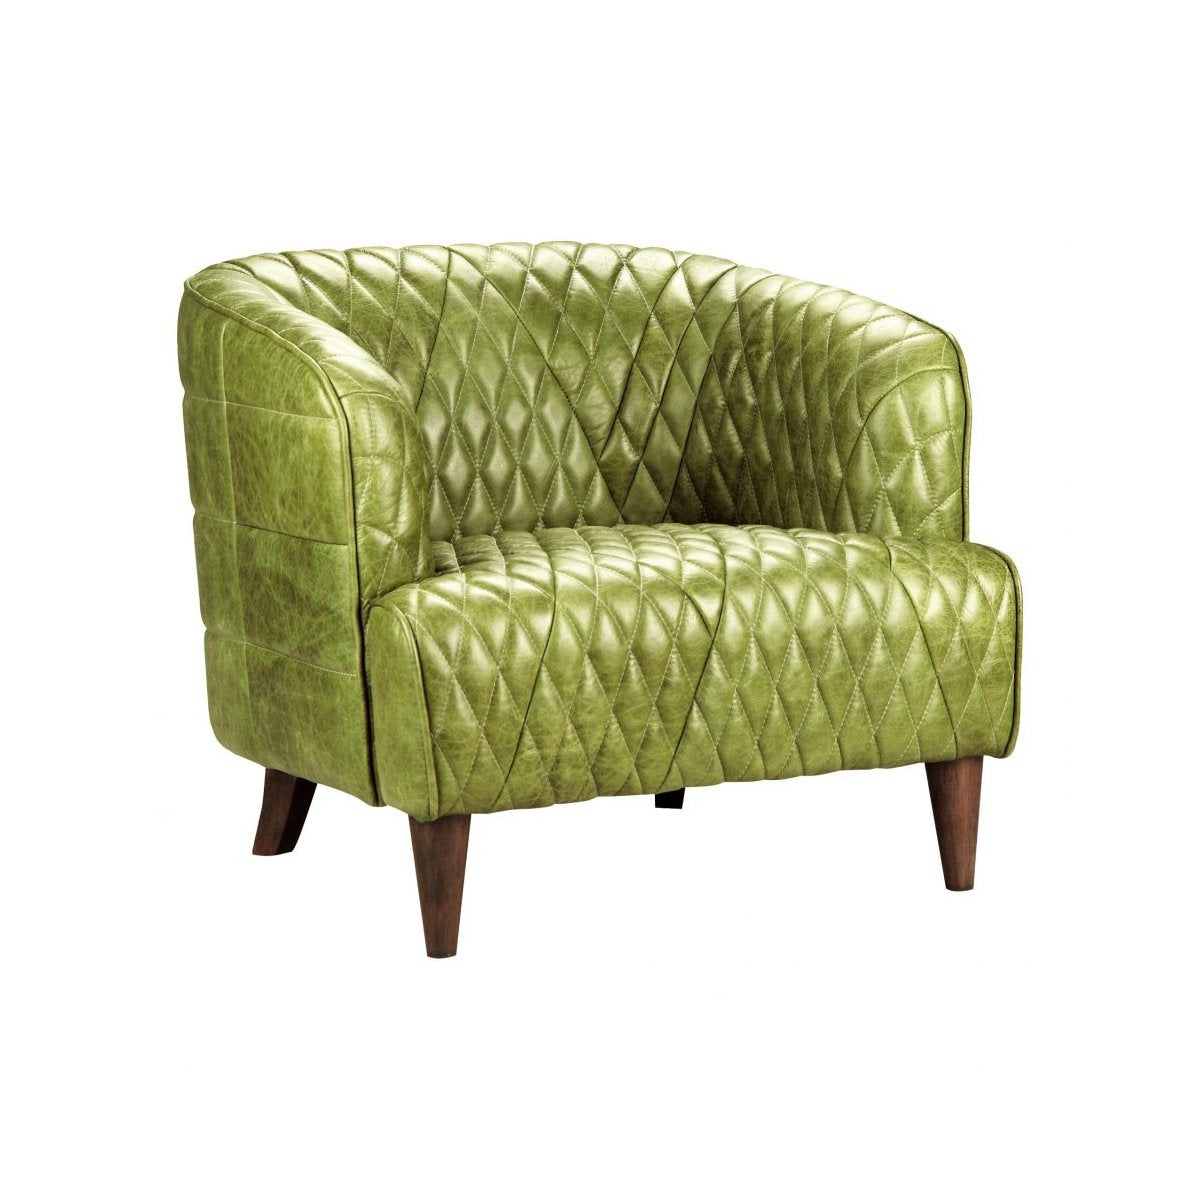 Load image into Gallery viewer, Magdelan Tufted Leather Arm Chair GreenOccasional Chairs Moe&amp;#39;s  Green   Four Hands, Burke Decor, Mid Century Modern Furniture, Old Bones Furniture Company, Old Bones Co, Modern Mid Century, Designer Furniture, https://www.oldbonesco.com/
